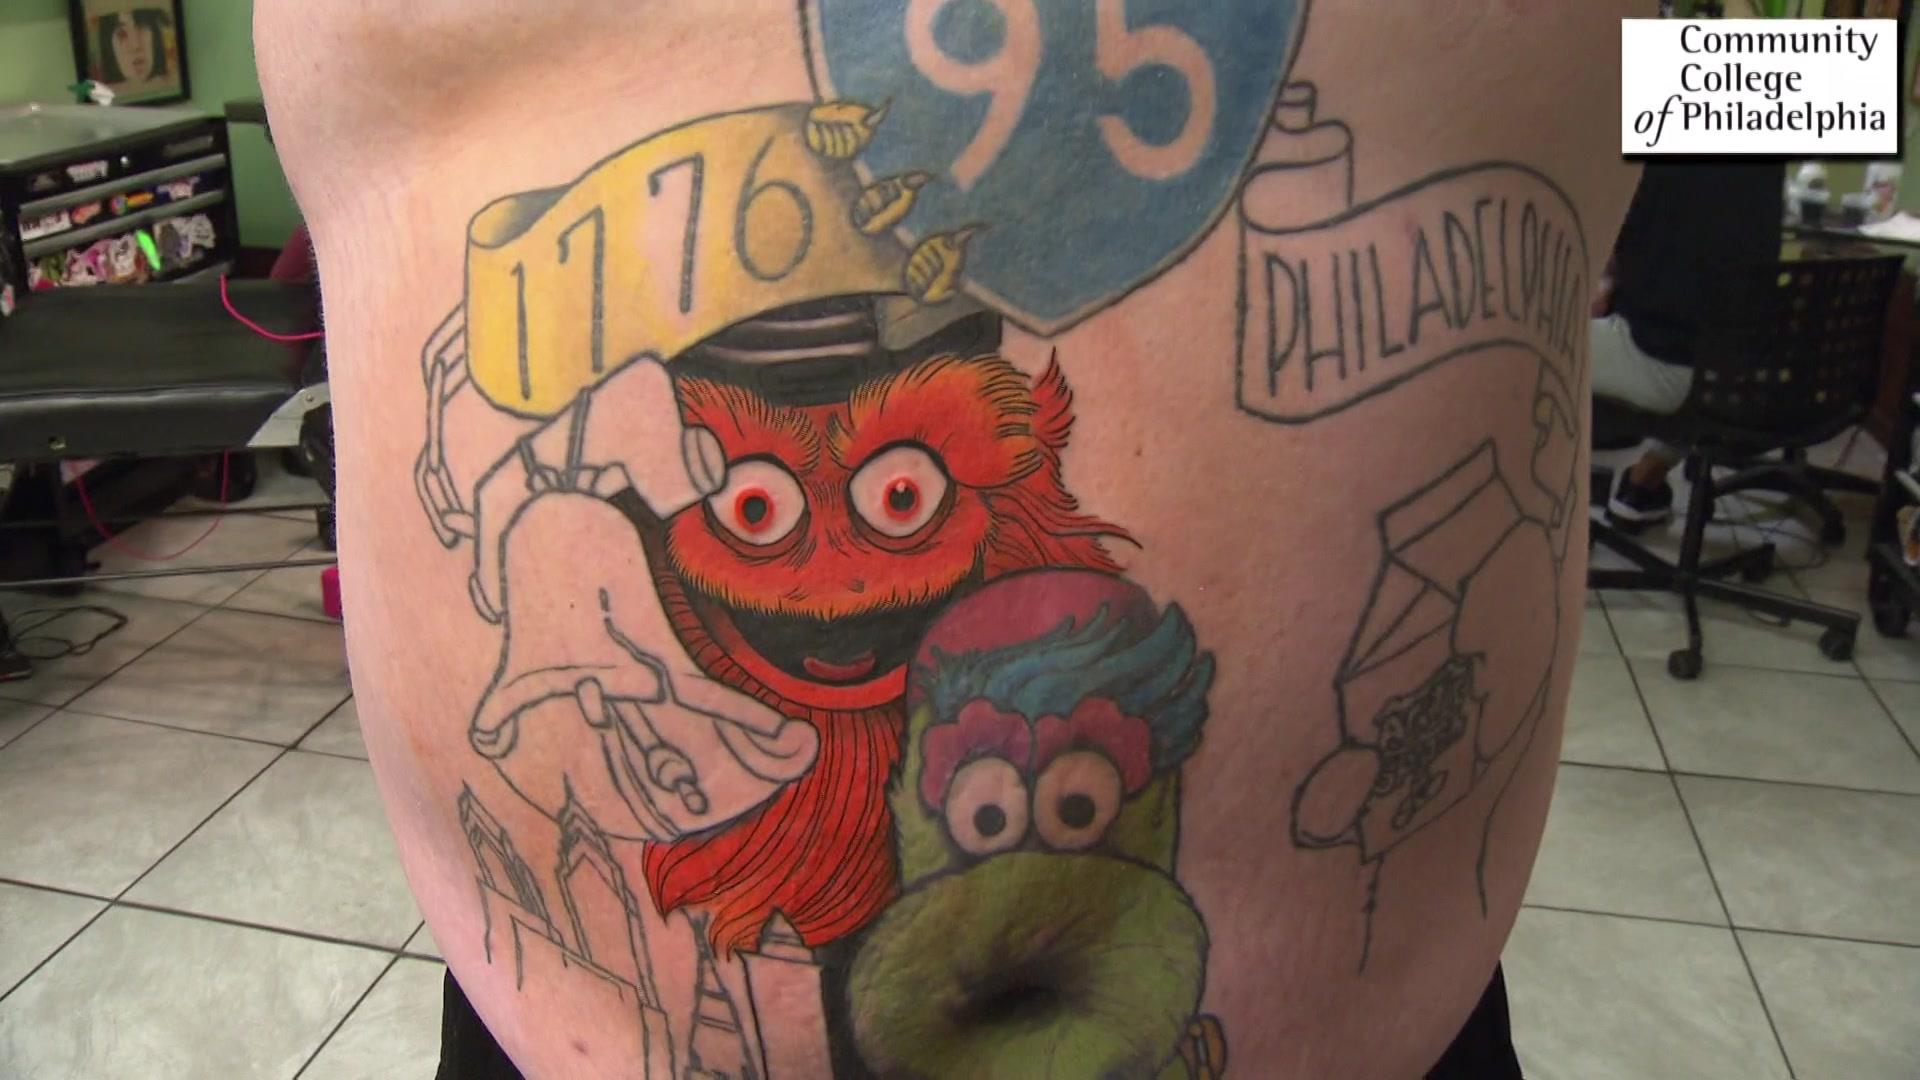 Club Tattoo on Twitter Oscar the Grouch done by Robert Kidd in Las Vegas  at Miracle Mile Studios clubtattoo httpstcoaIX6e29Brr  Twitter